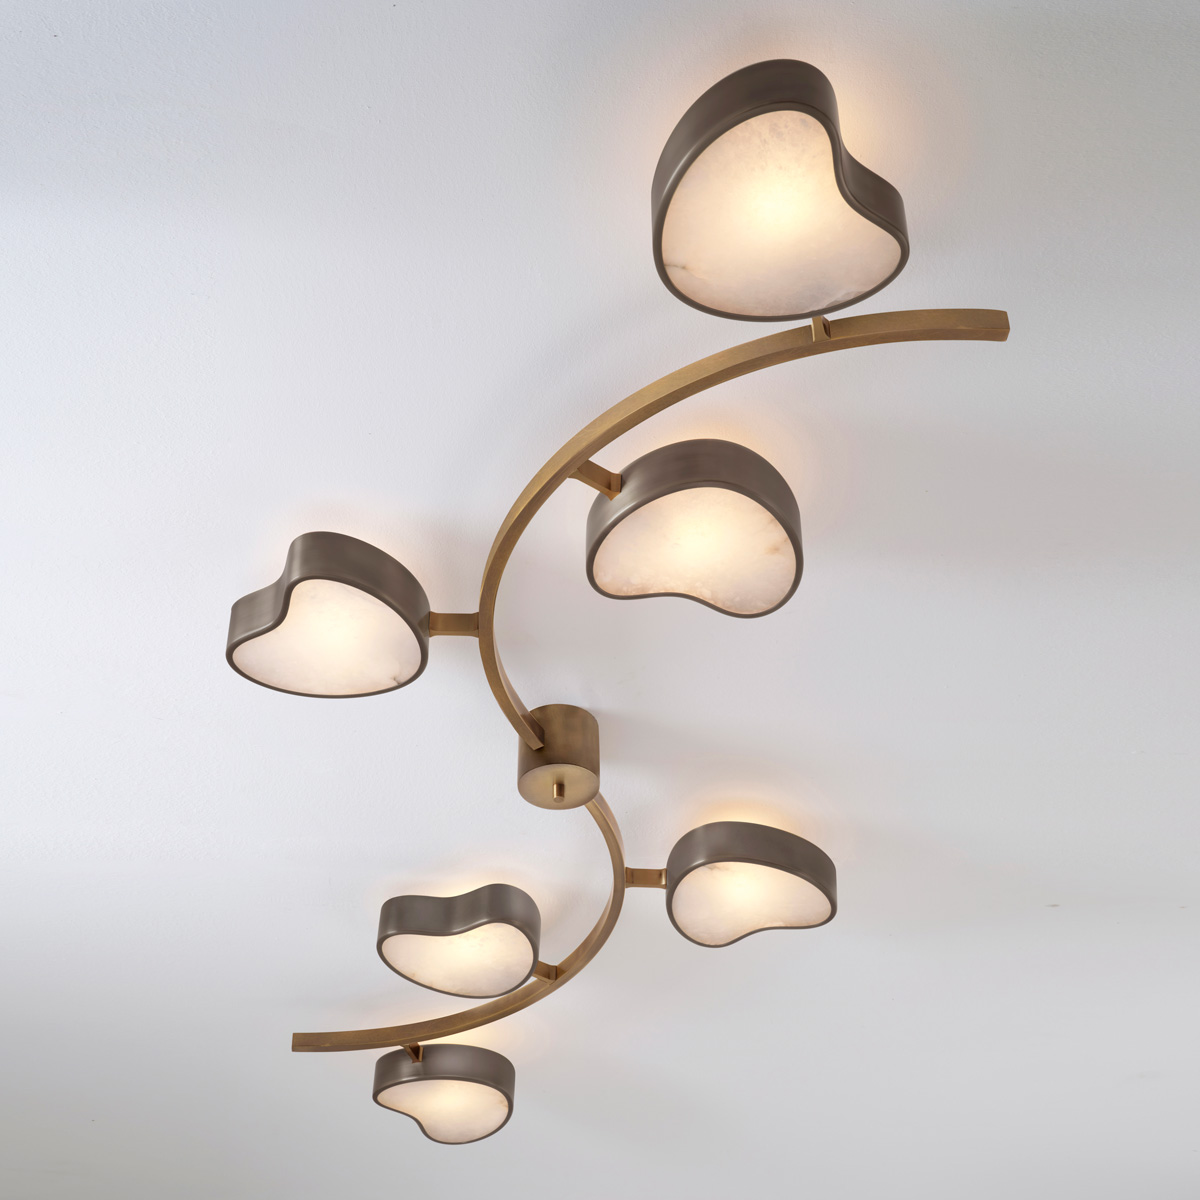 Cuore serpentine ceiling light by gaspare asaro